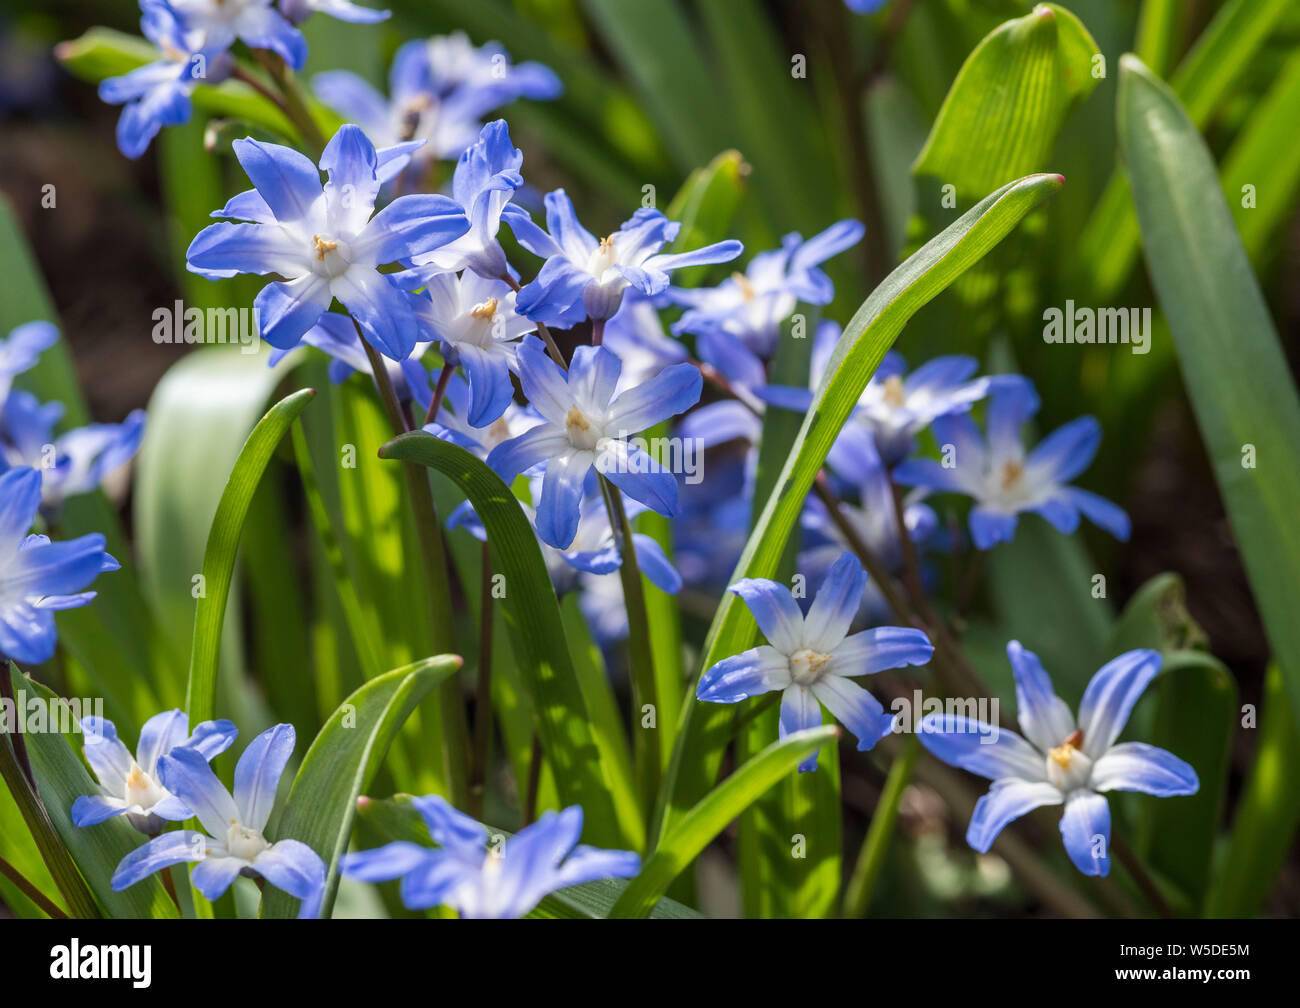 Chionodoxa forbesii - Forbes' glory-of-the-snow is a bulbous perennial from south-west Turkey flowering in early spring. C.forbesii resembles C.siehei Stock Photo